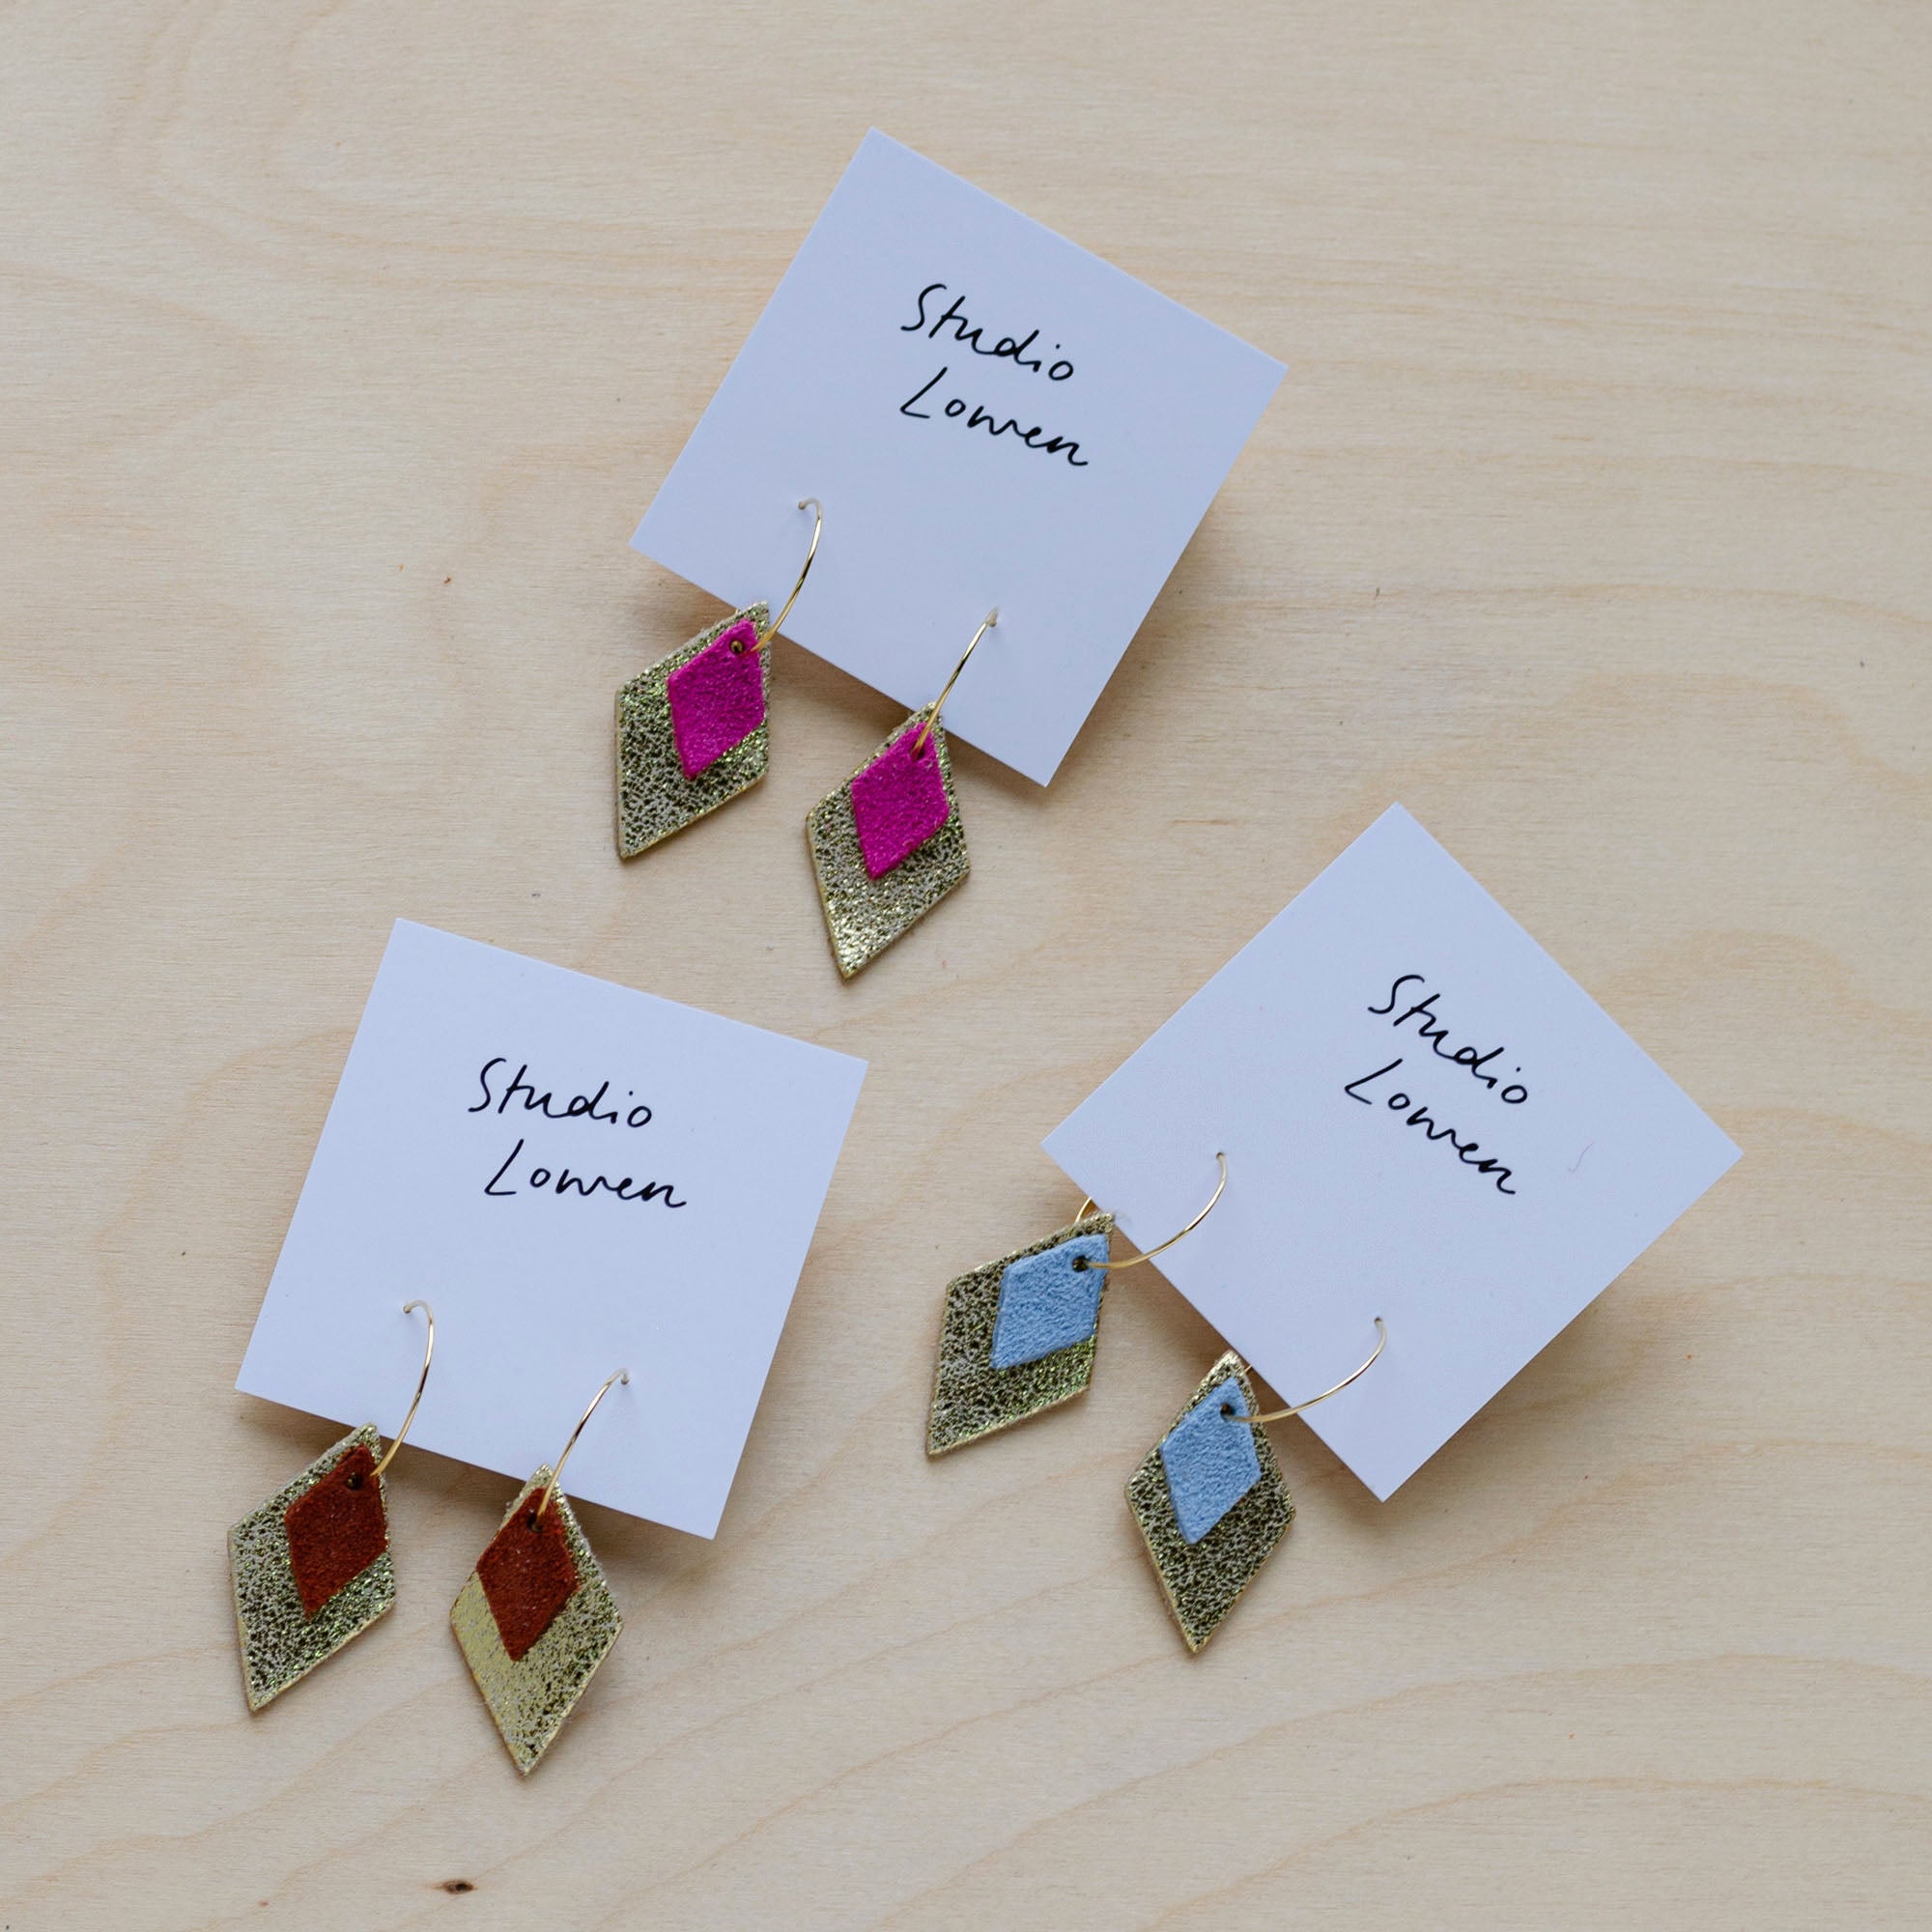 Three pairs of the Bea Hoop earrings in Fuchsia pink, Pale Blue and Chestnut Brown